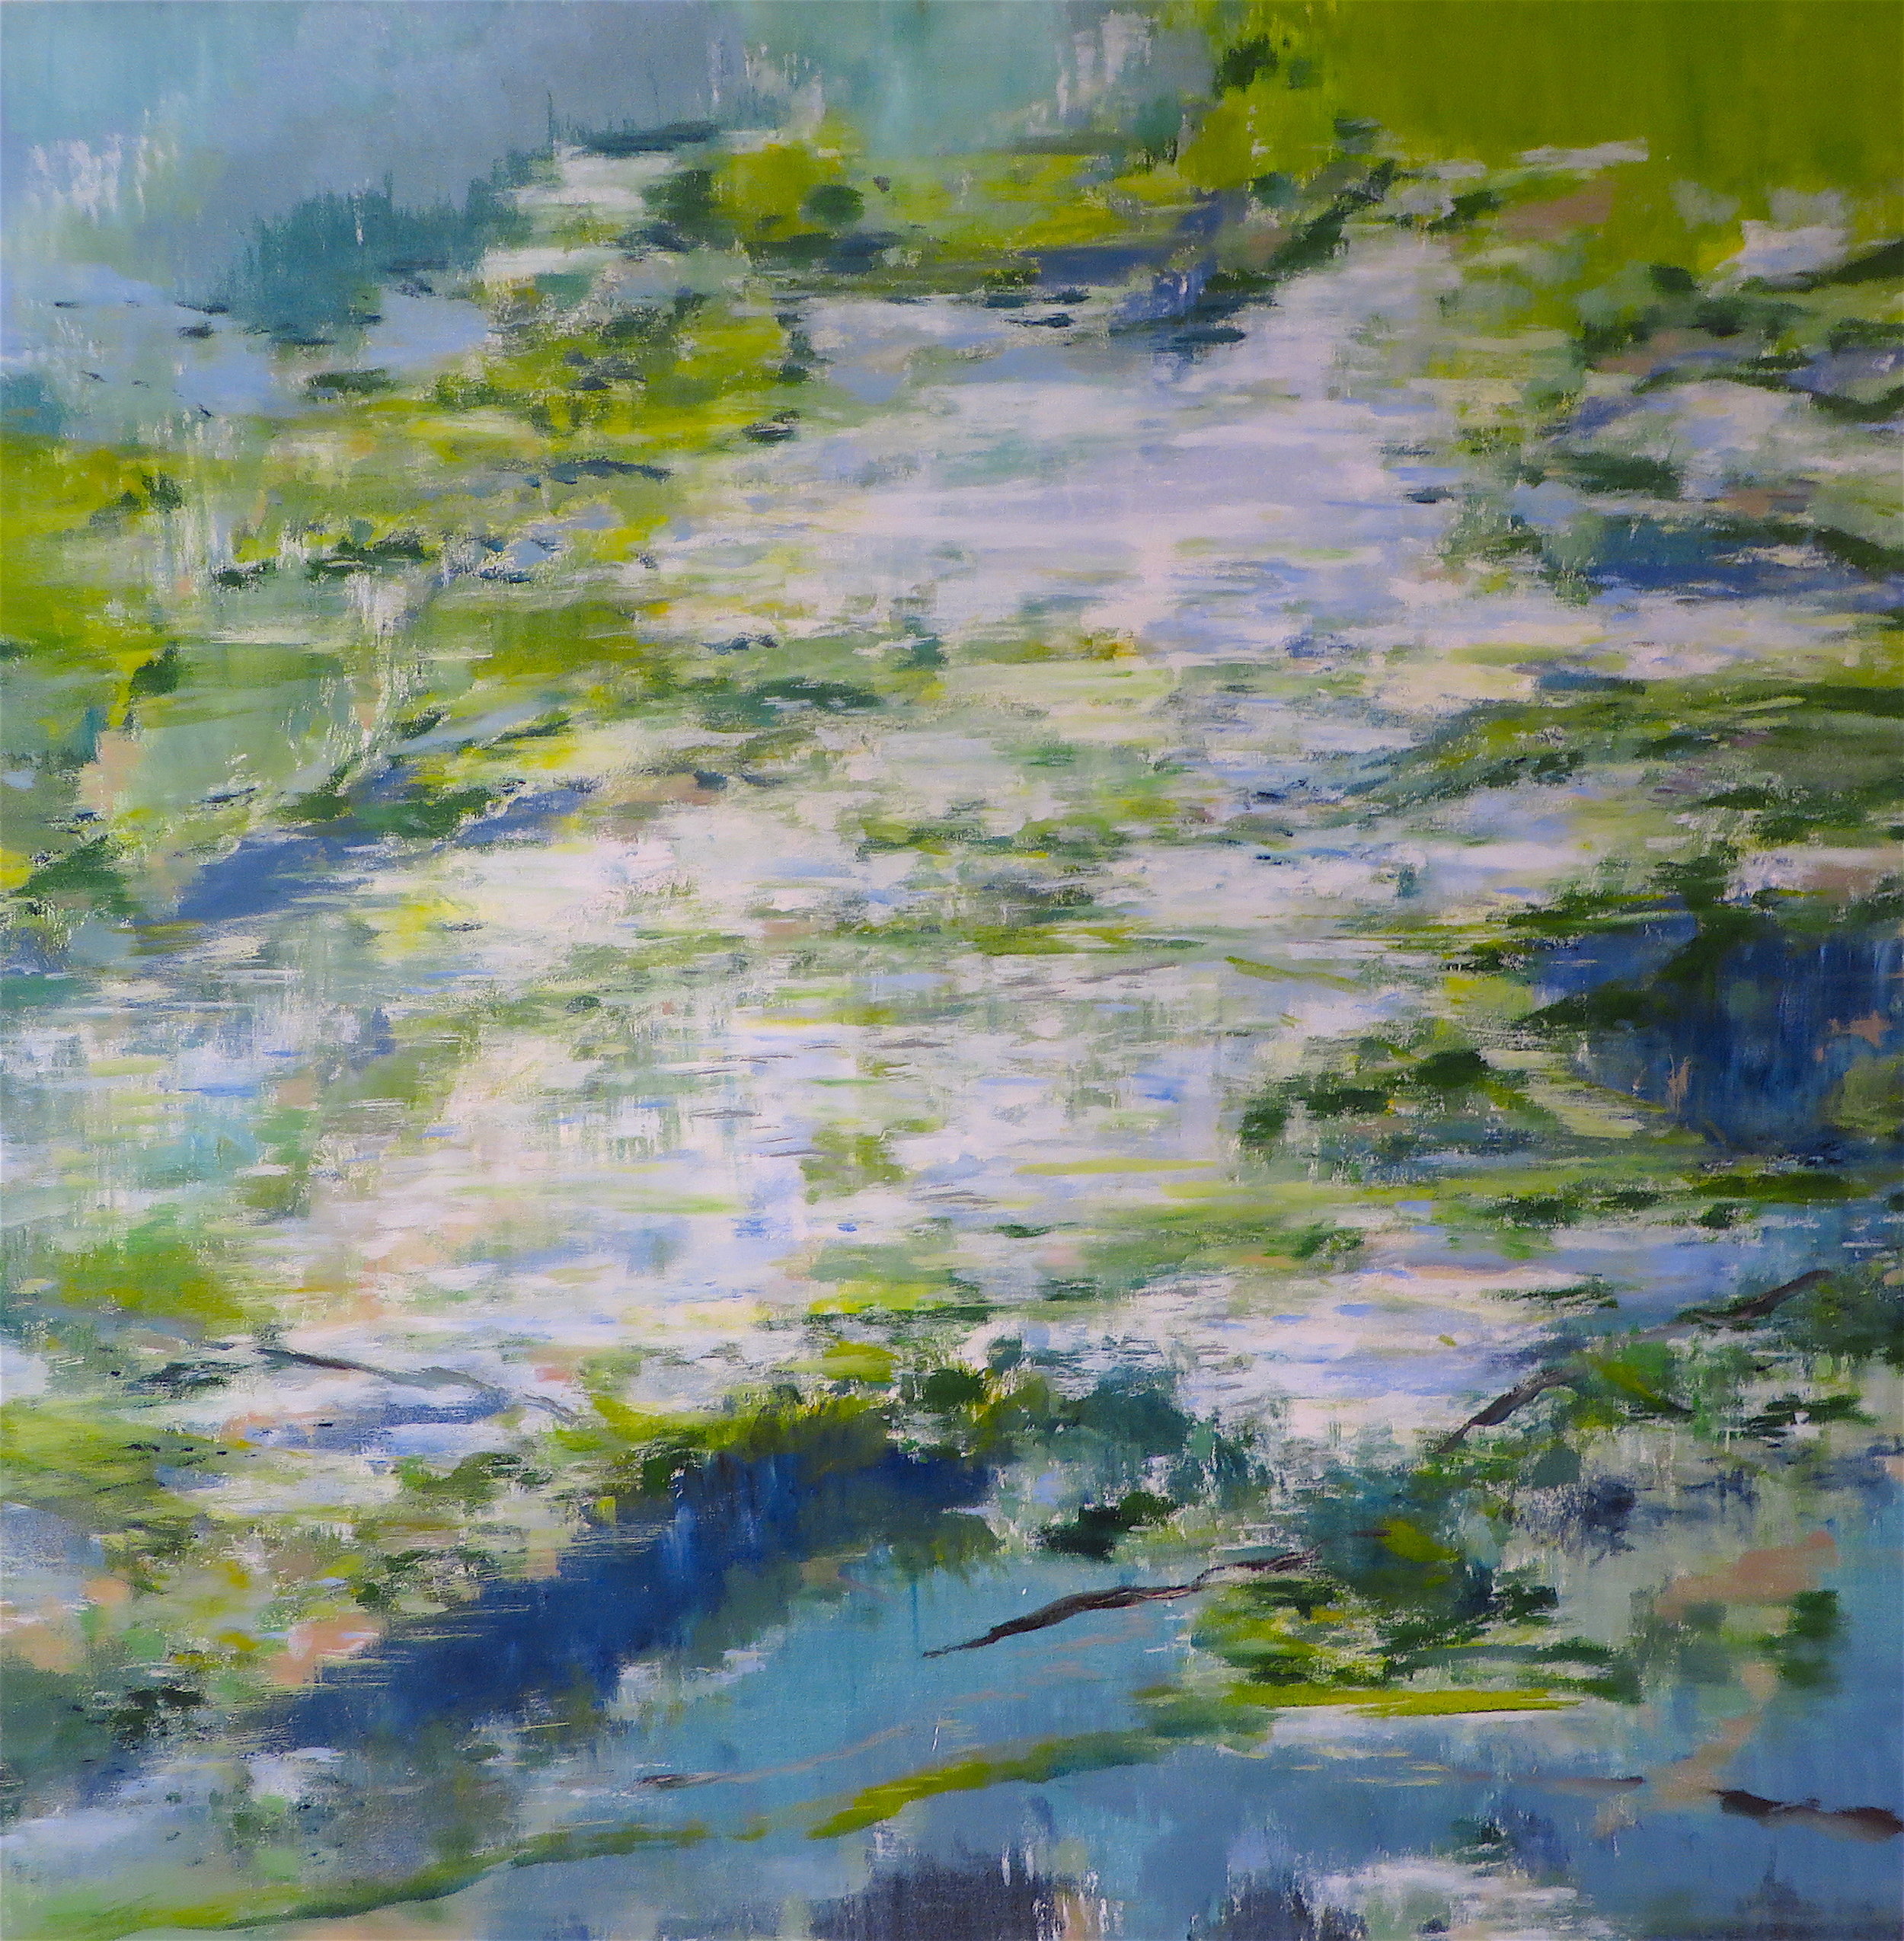 SOLD - Earth Green Water Blue, 2012